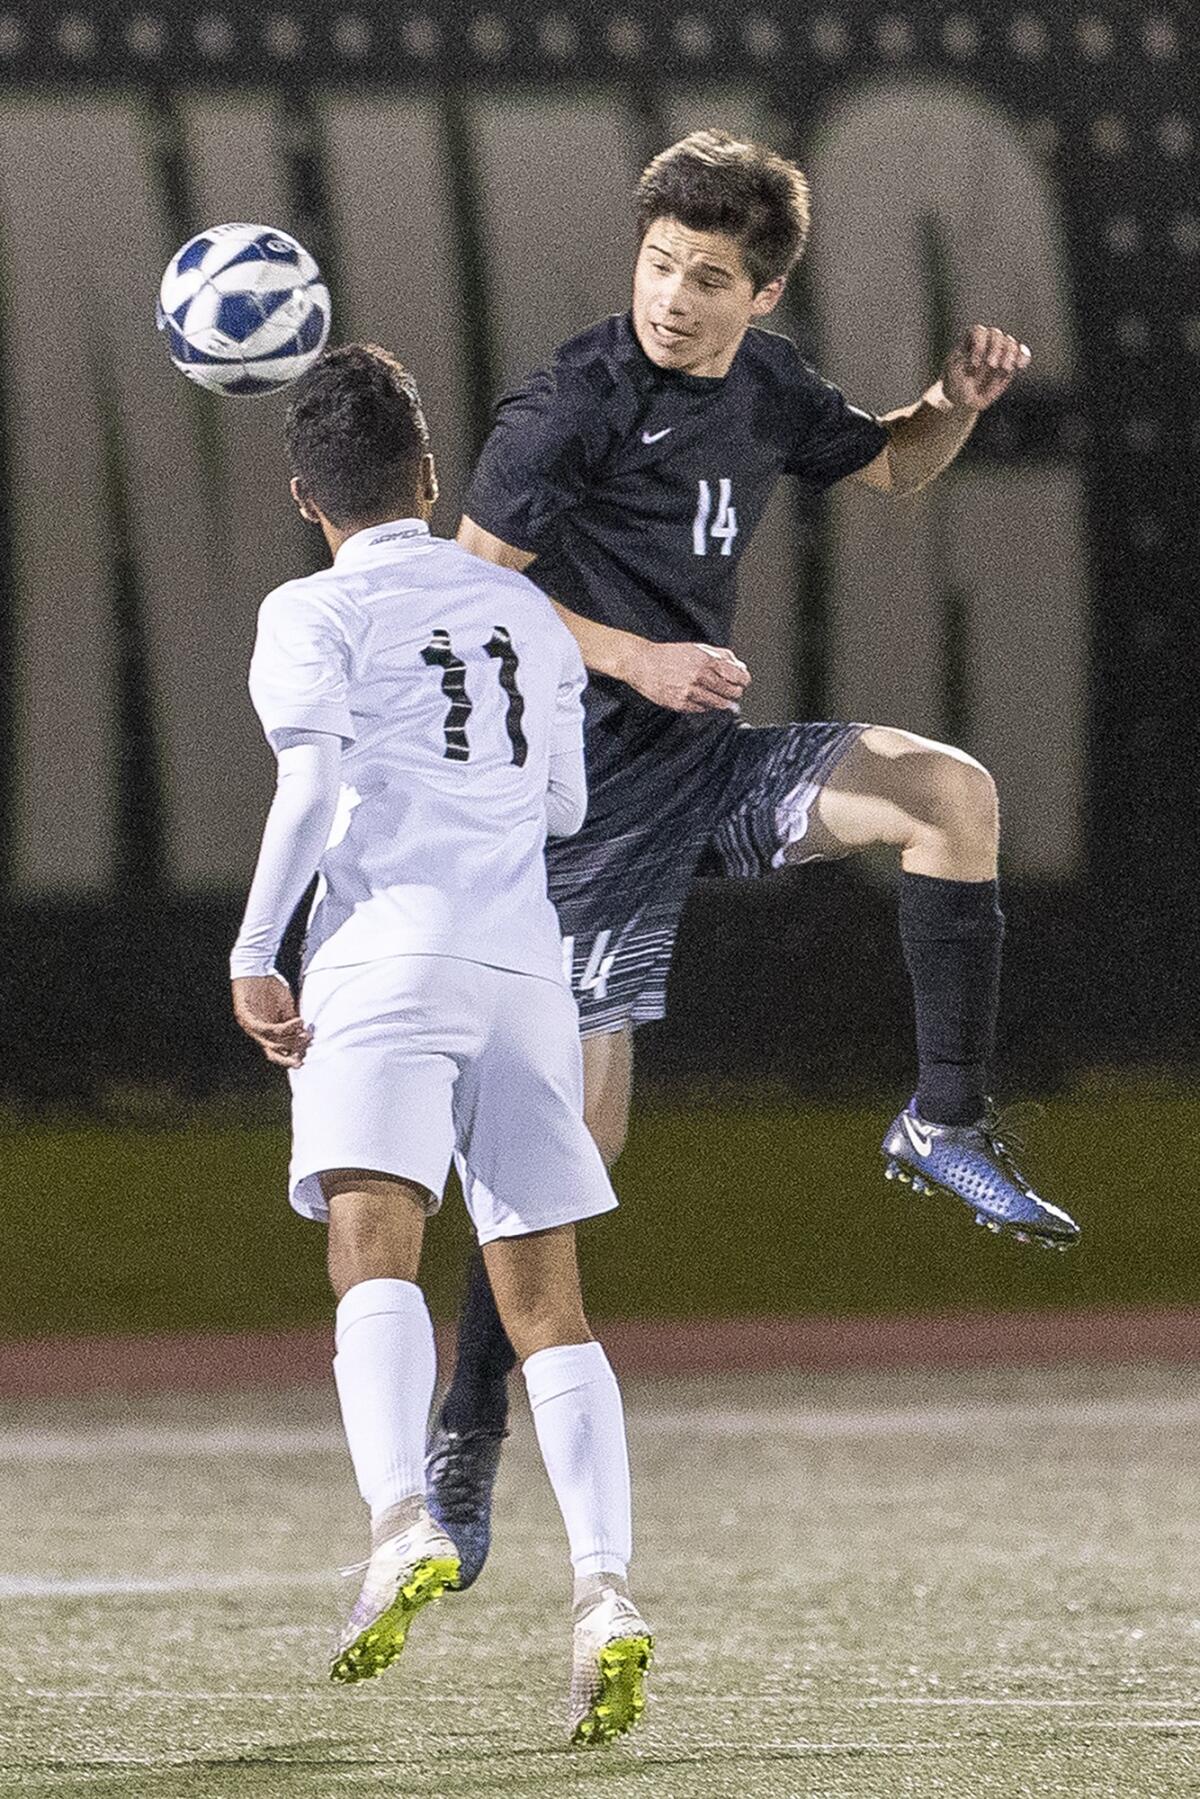 Sage Hill's Jonathan Lake goes up for a header against St. Anthony's Nick Sparks.